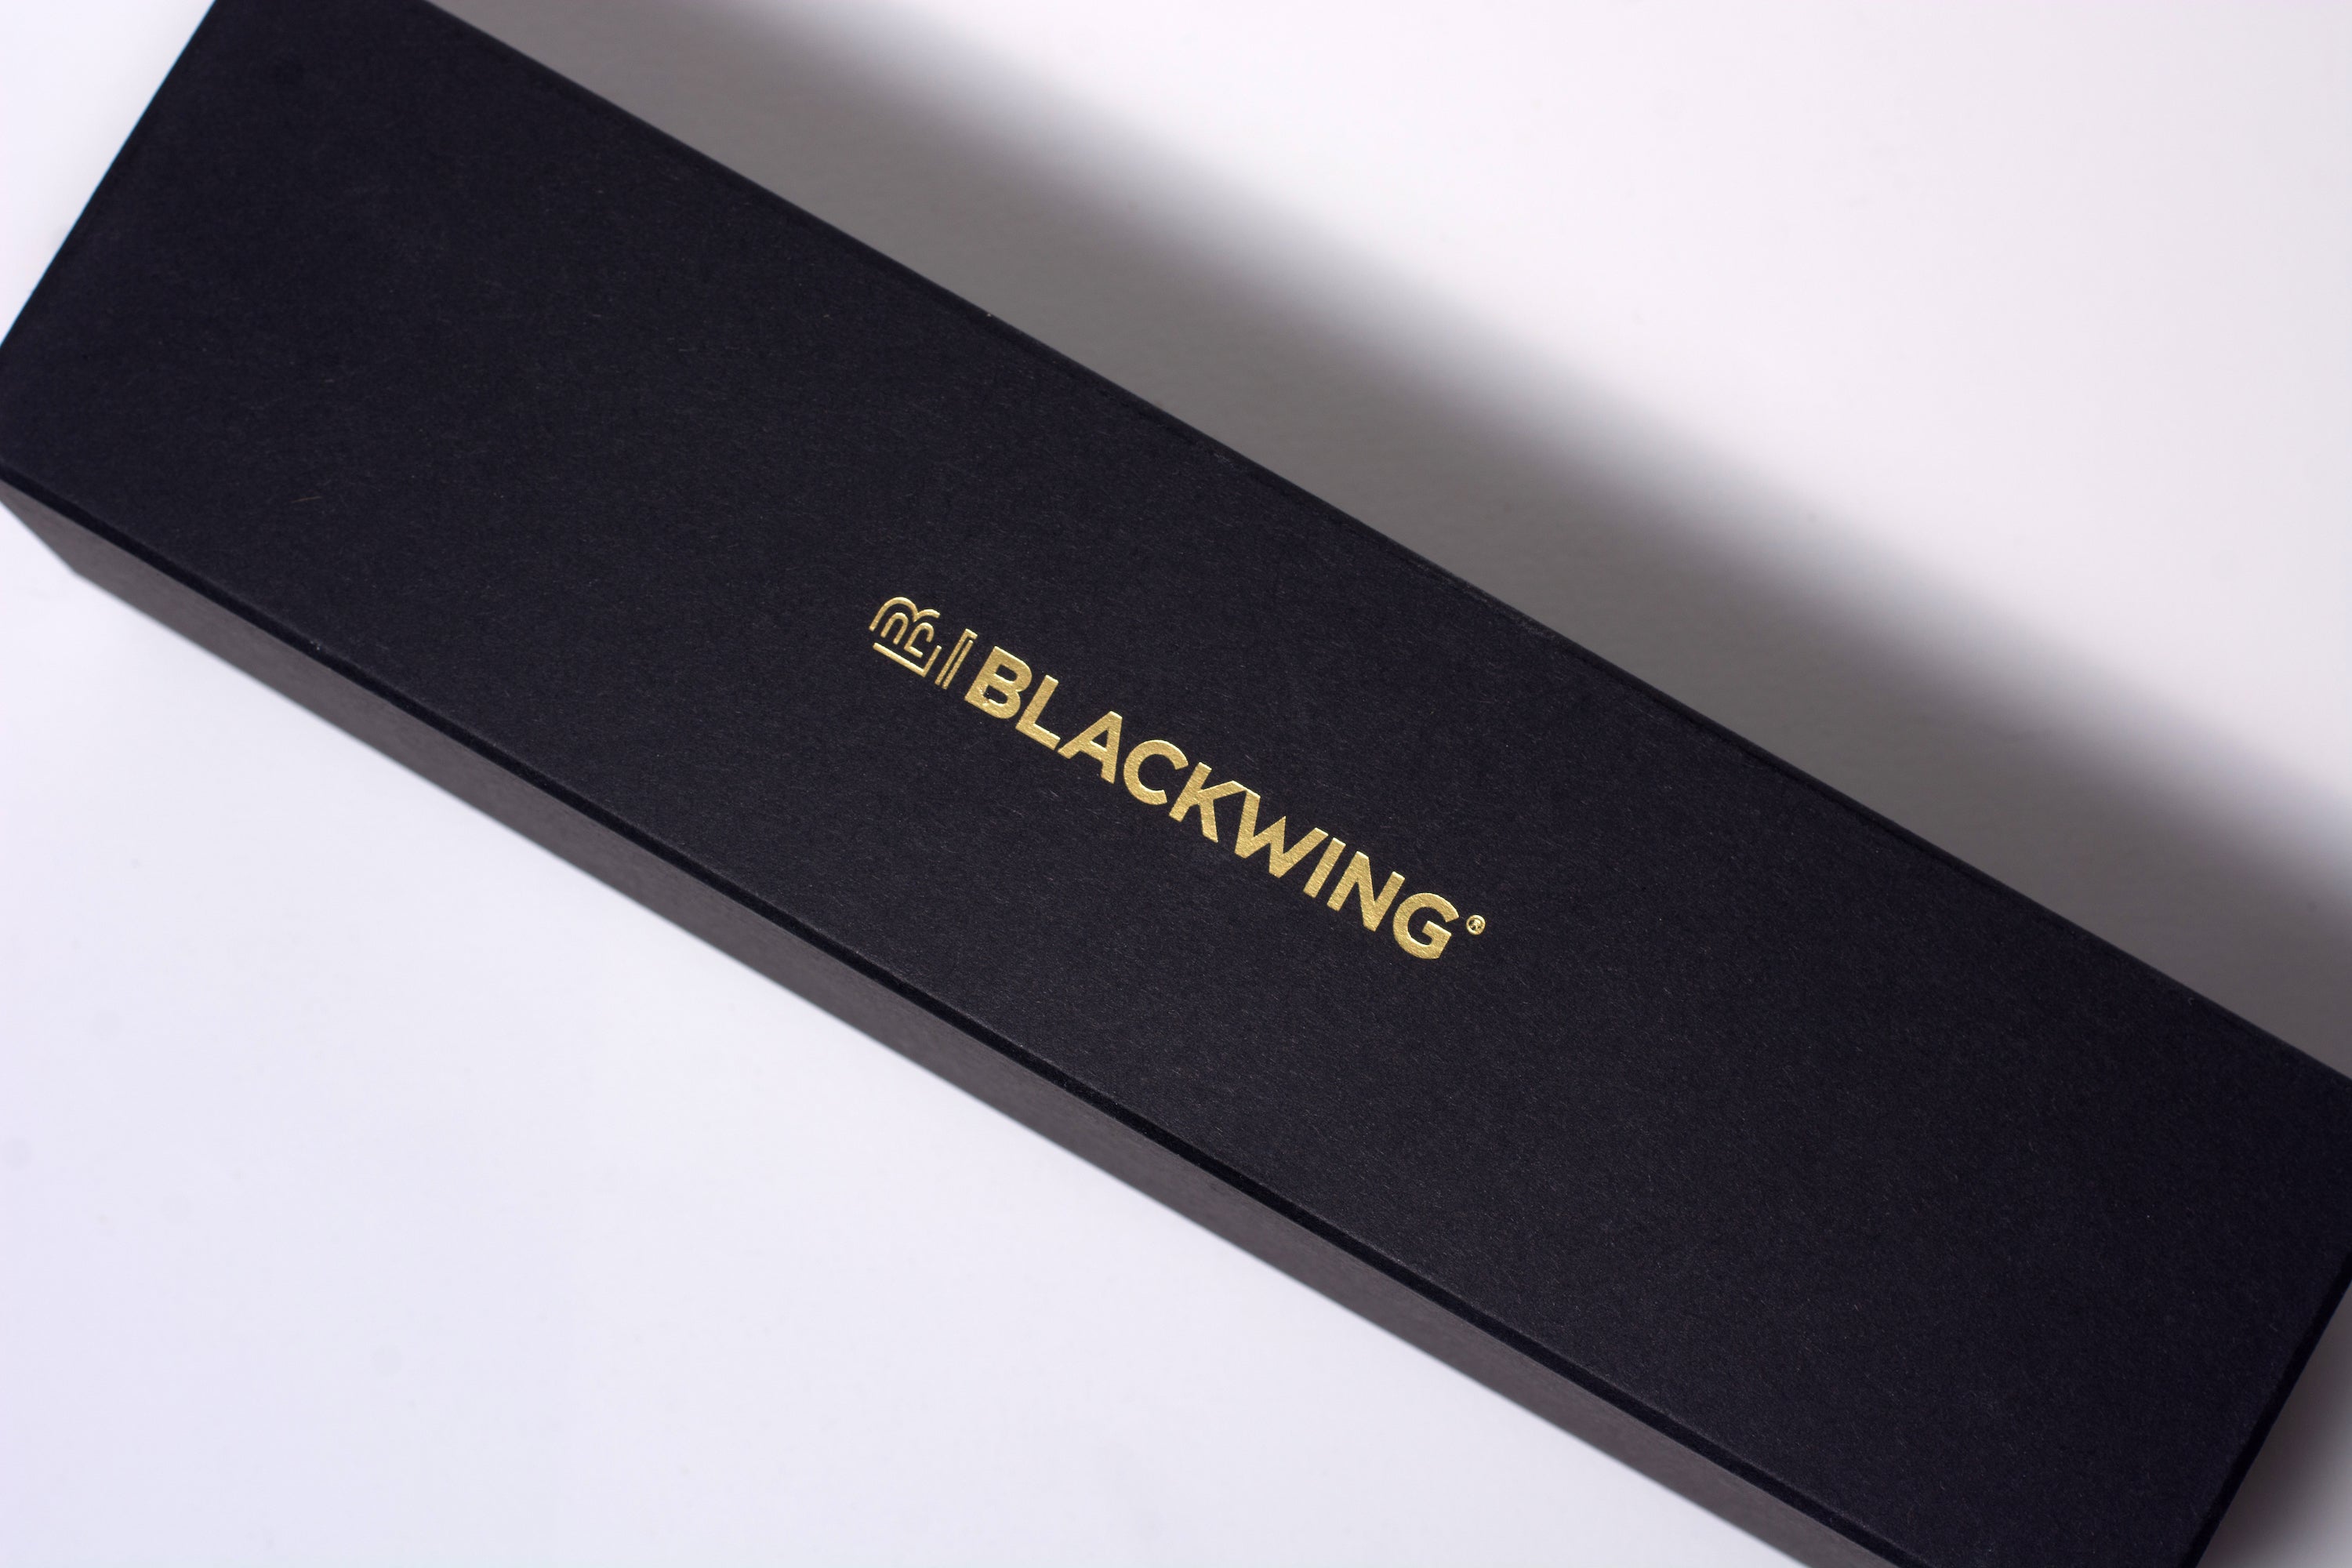 Blackwing Piano Box  The Blackwing Piano Box features a mix of 12